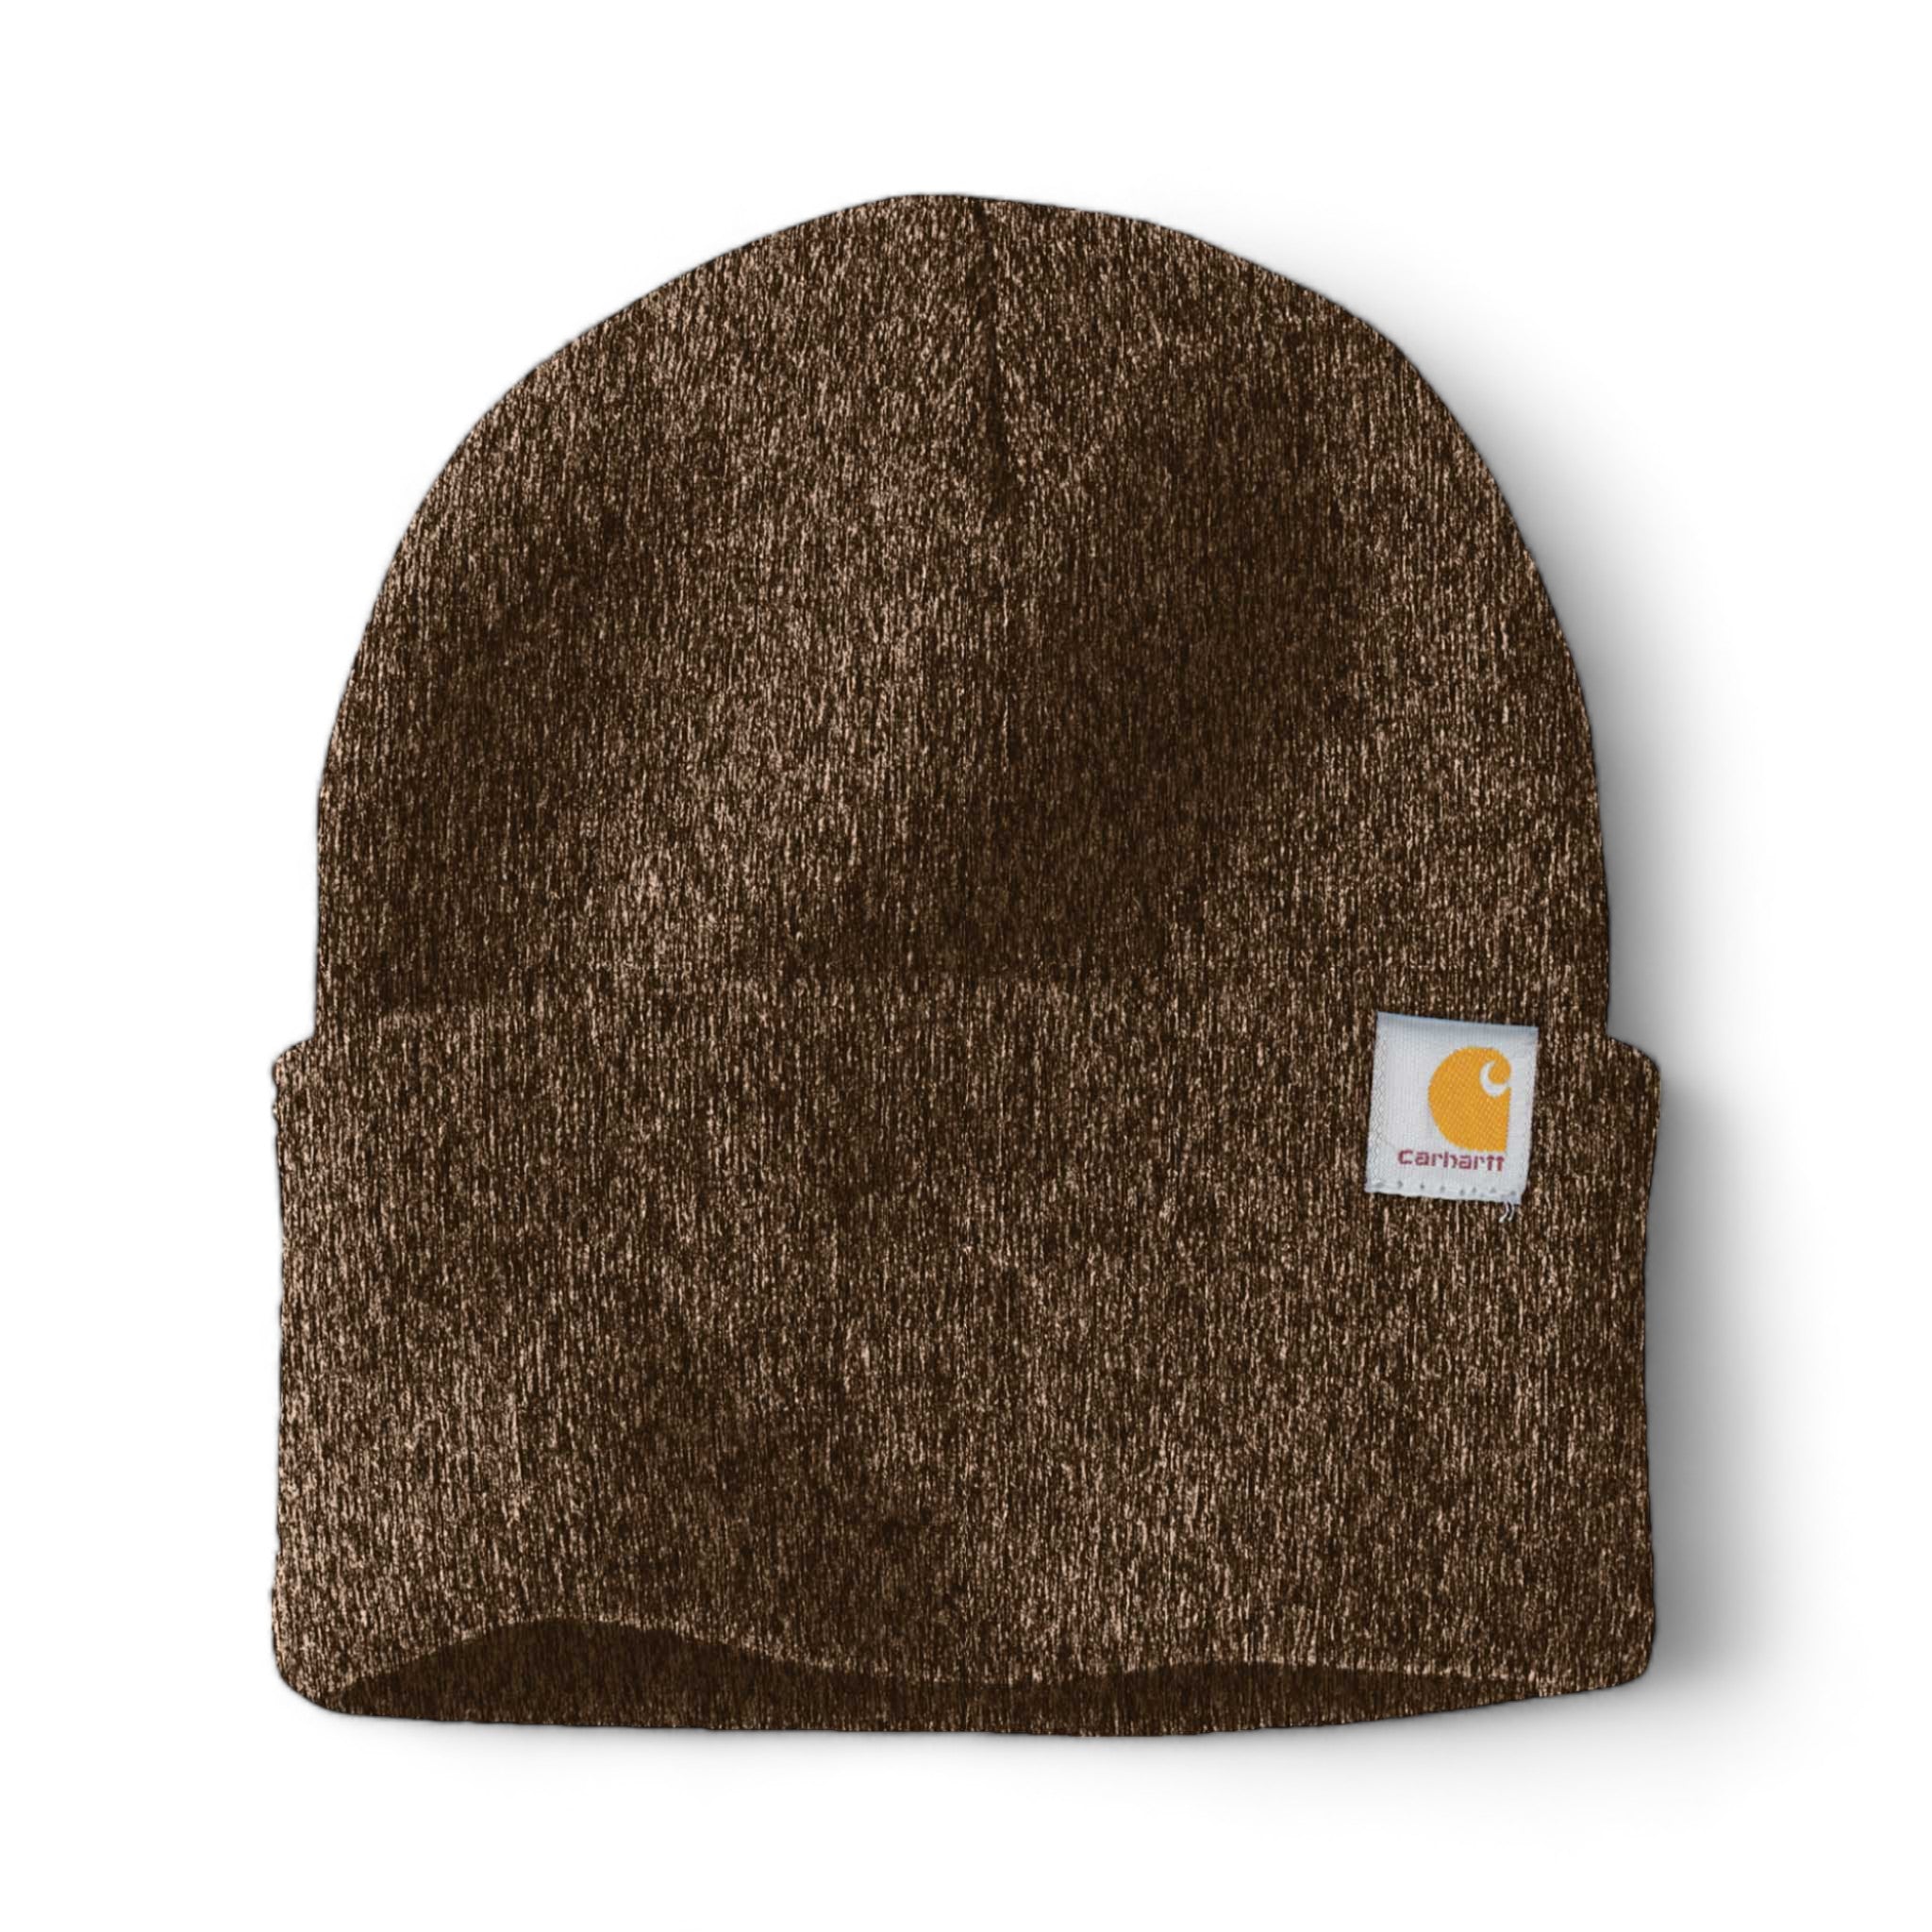 Front view of Carhartt CT104597 custom hat in dark brown and sandstone